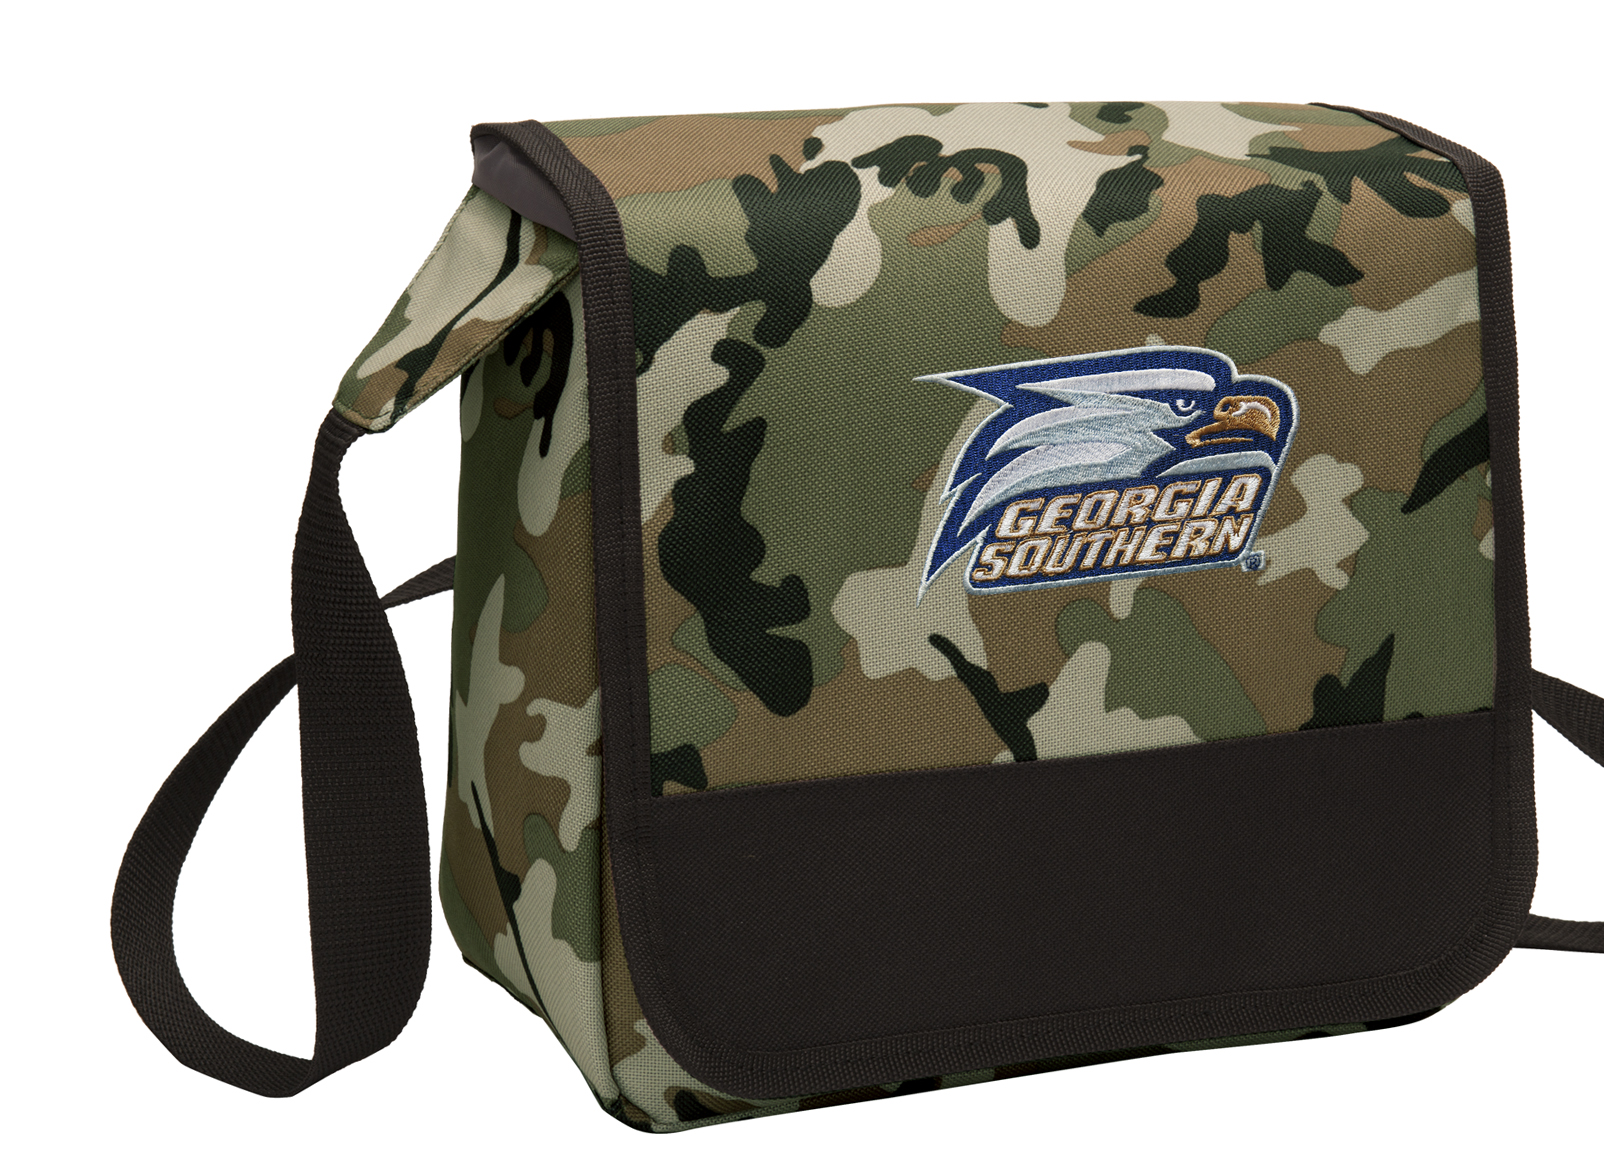 CAMO Georgia Southern Lunch Bag Stylish OFFICIAL Georgia Southern Eagles CAMO Lunchbox Cooler for School or Office - Men or Women - image 1 of 2